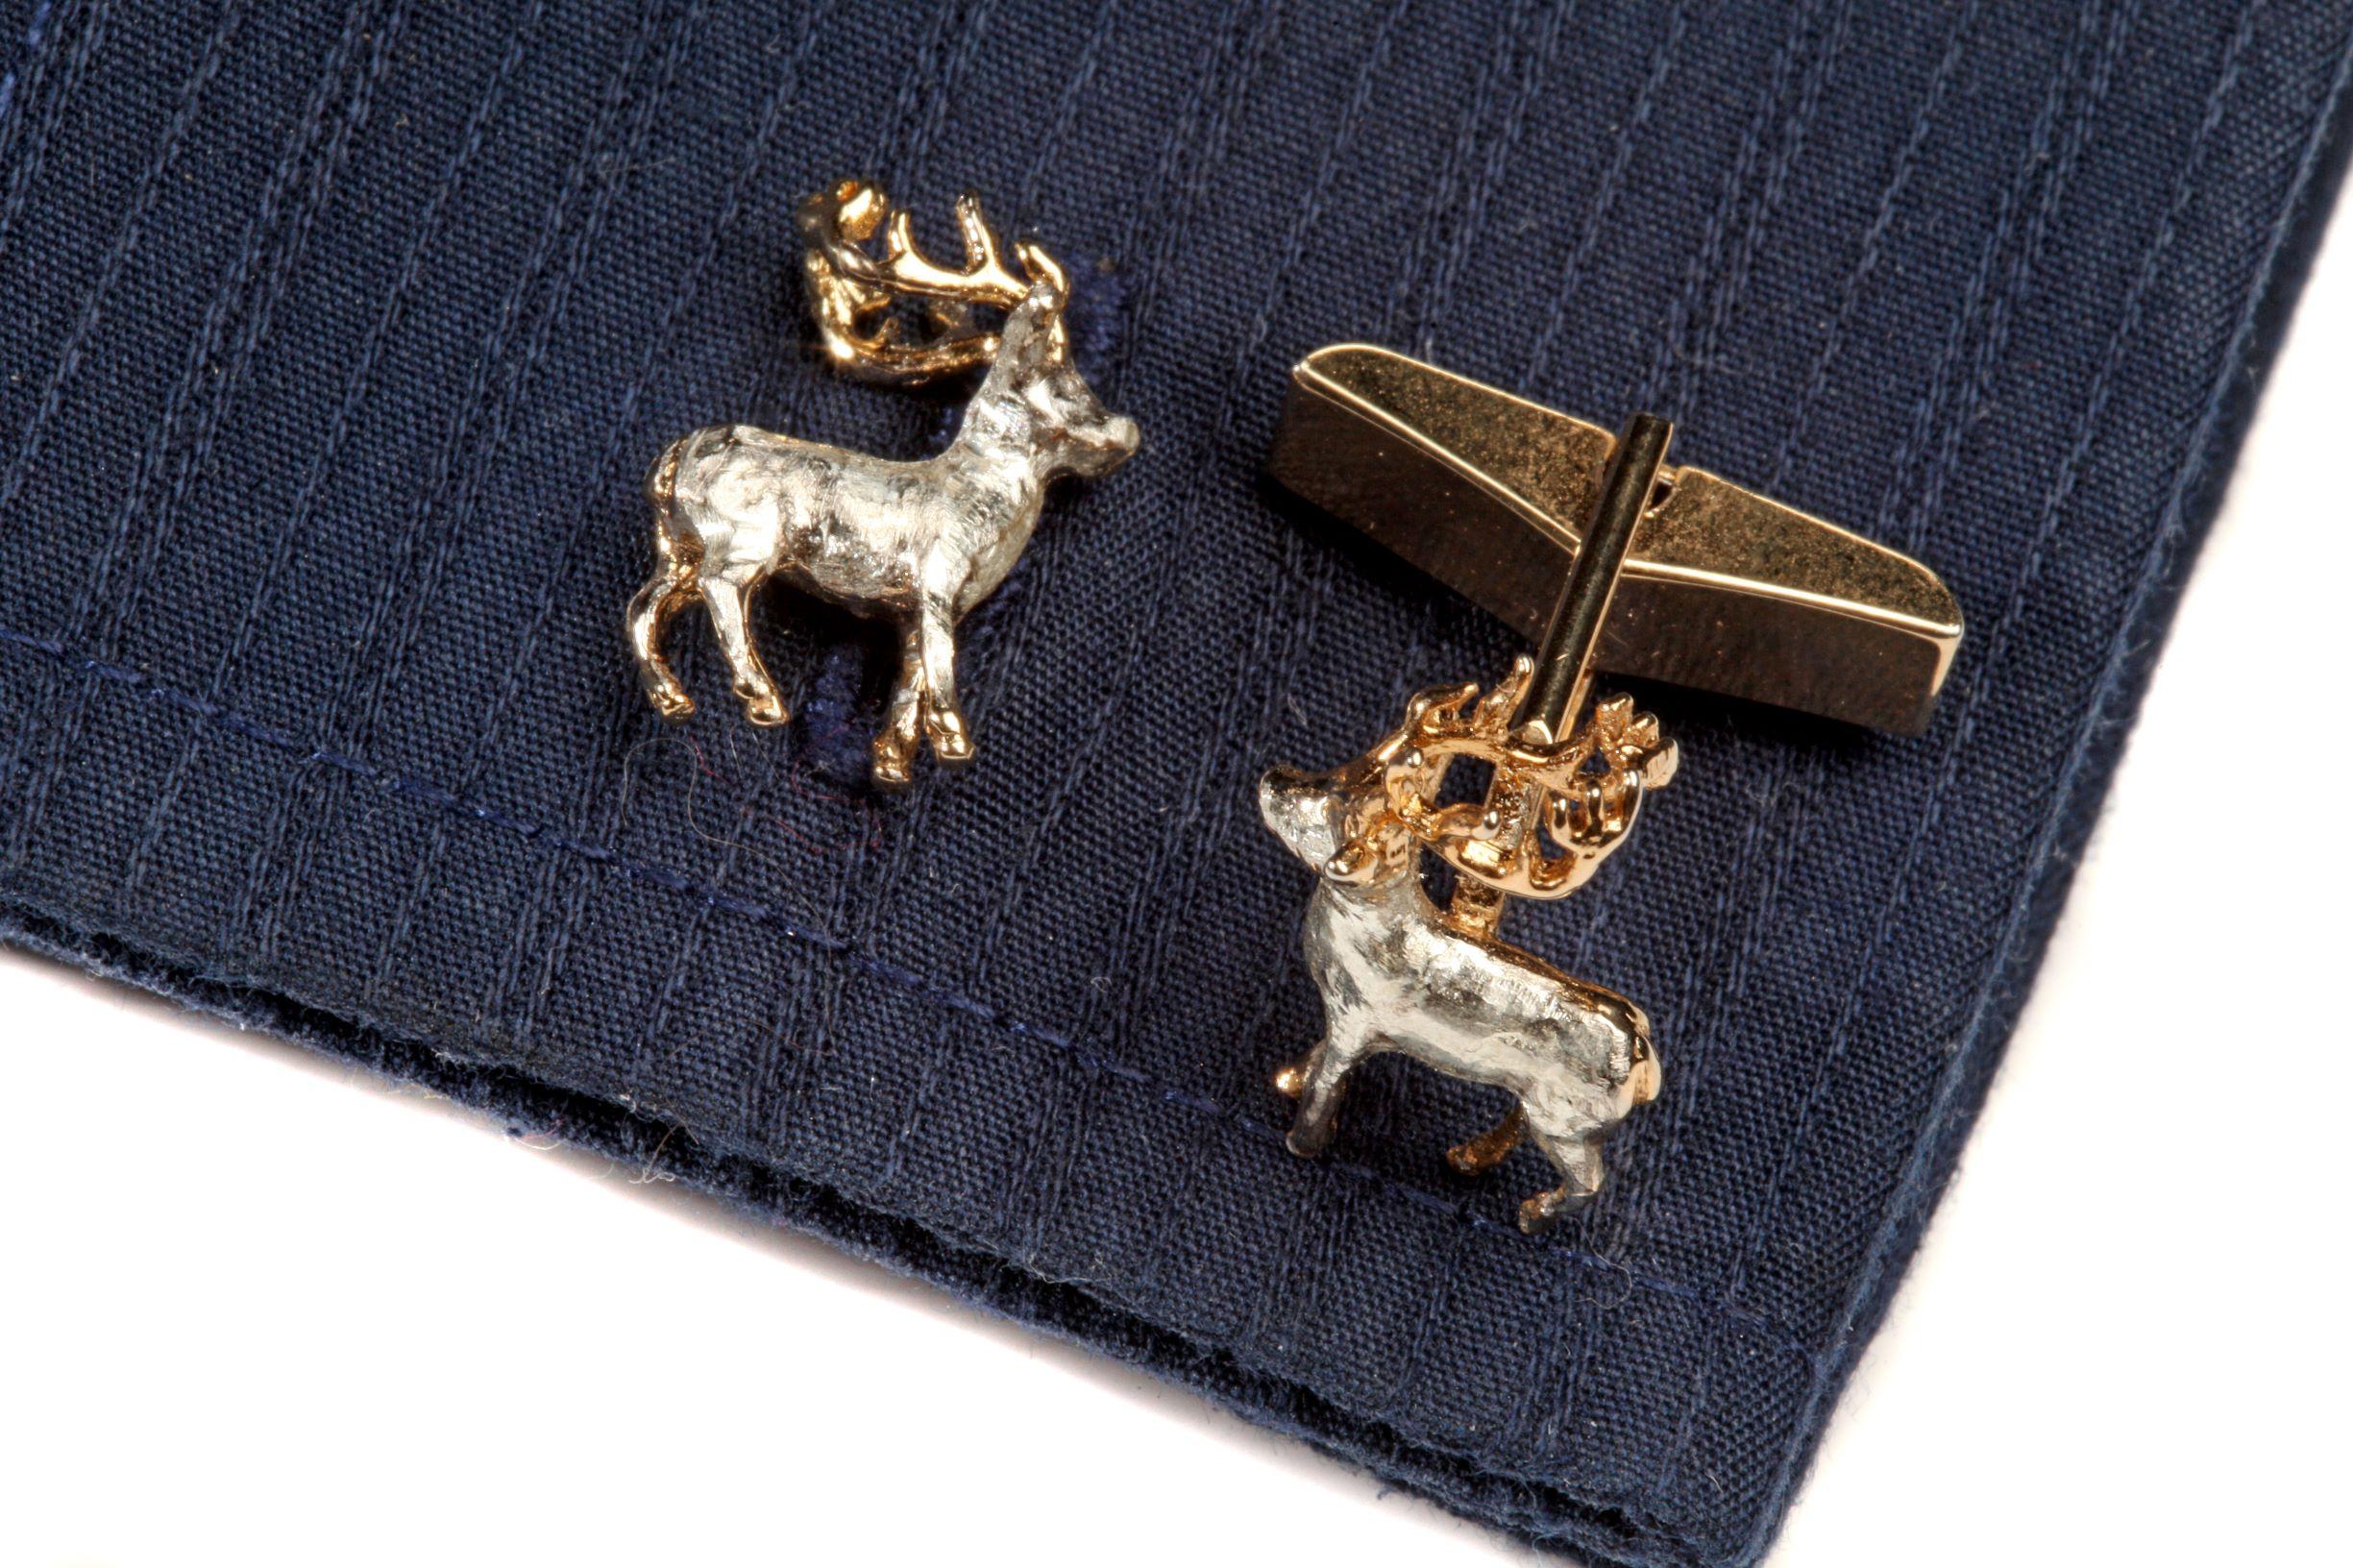 Stunning Stag cufflinks made from solid Sterling Silver with a 18 karat gold layer (5 microns thick) for artistic effect.

These highly detailed cufflinks are ideal for the discerning gentleman in the hunting/shooting world.The combination of 18